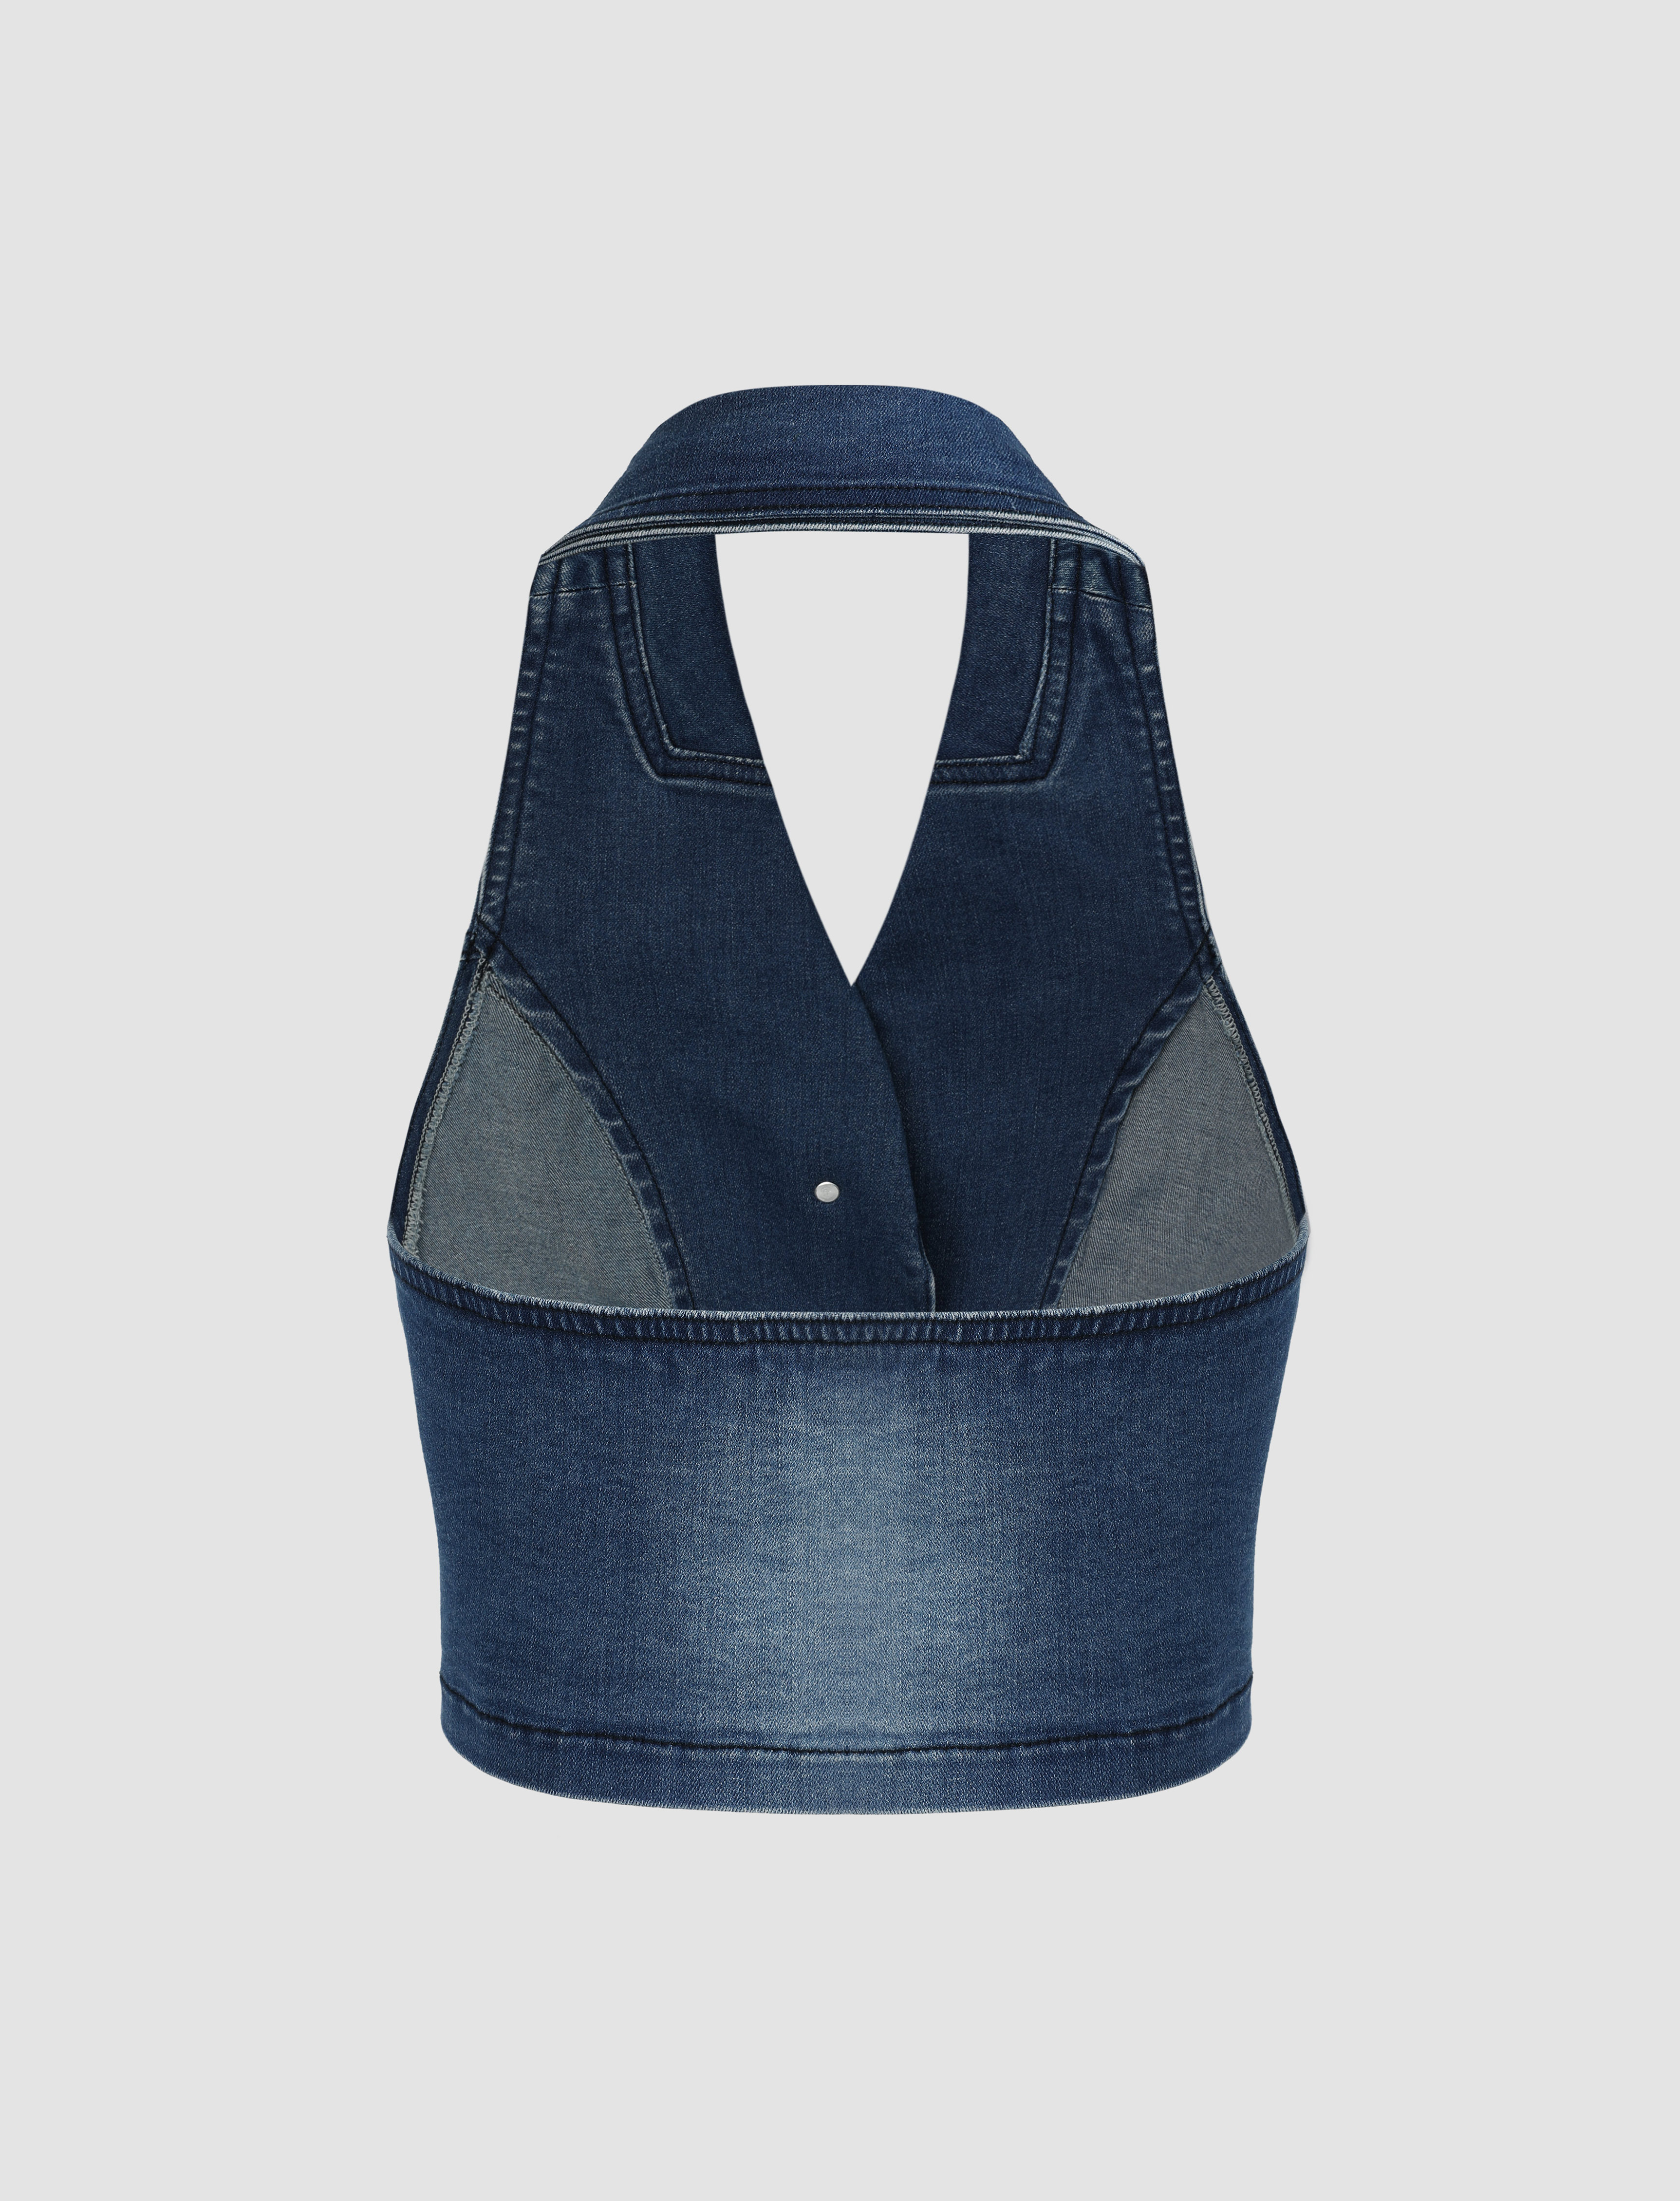 Cowgirl Tracy's Denim Halter Top